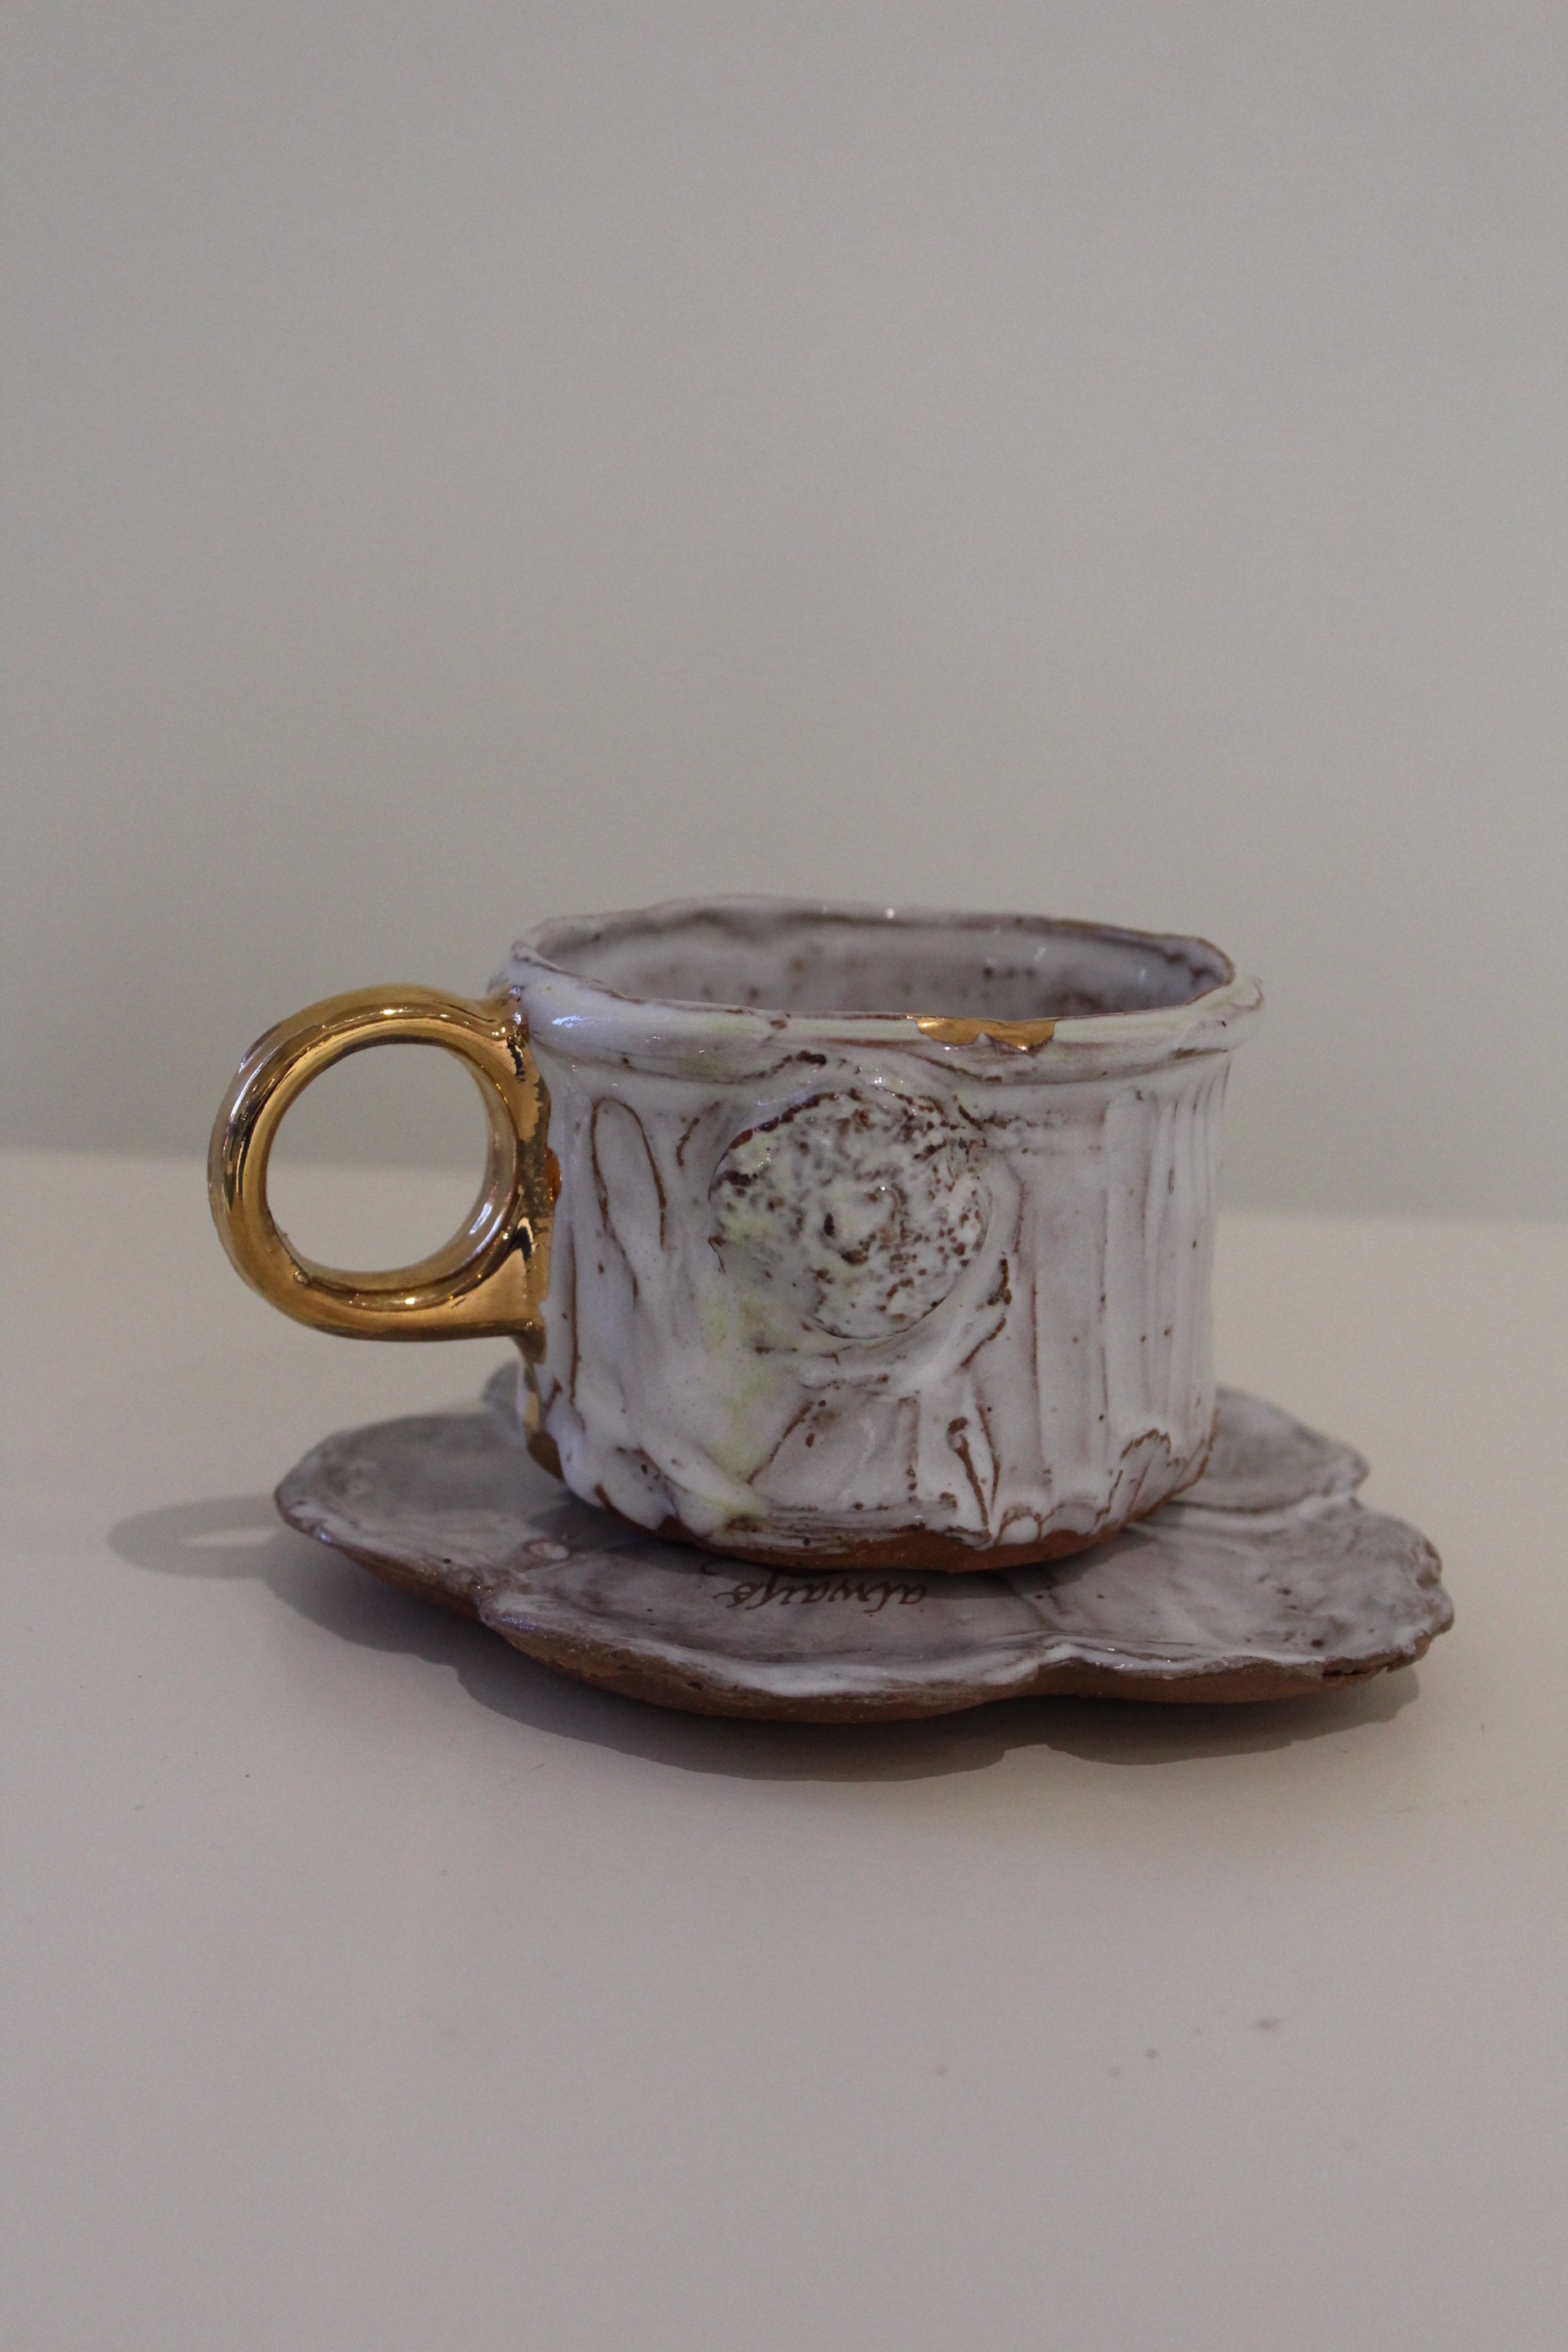 Espresso Cup and Saucer 1 (belle ame) by Therese Knowles